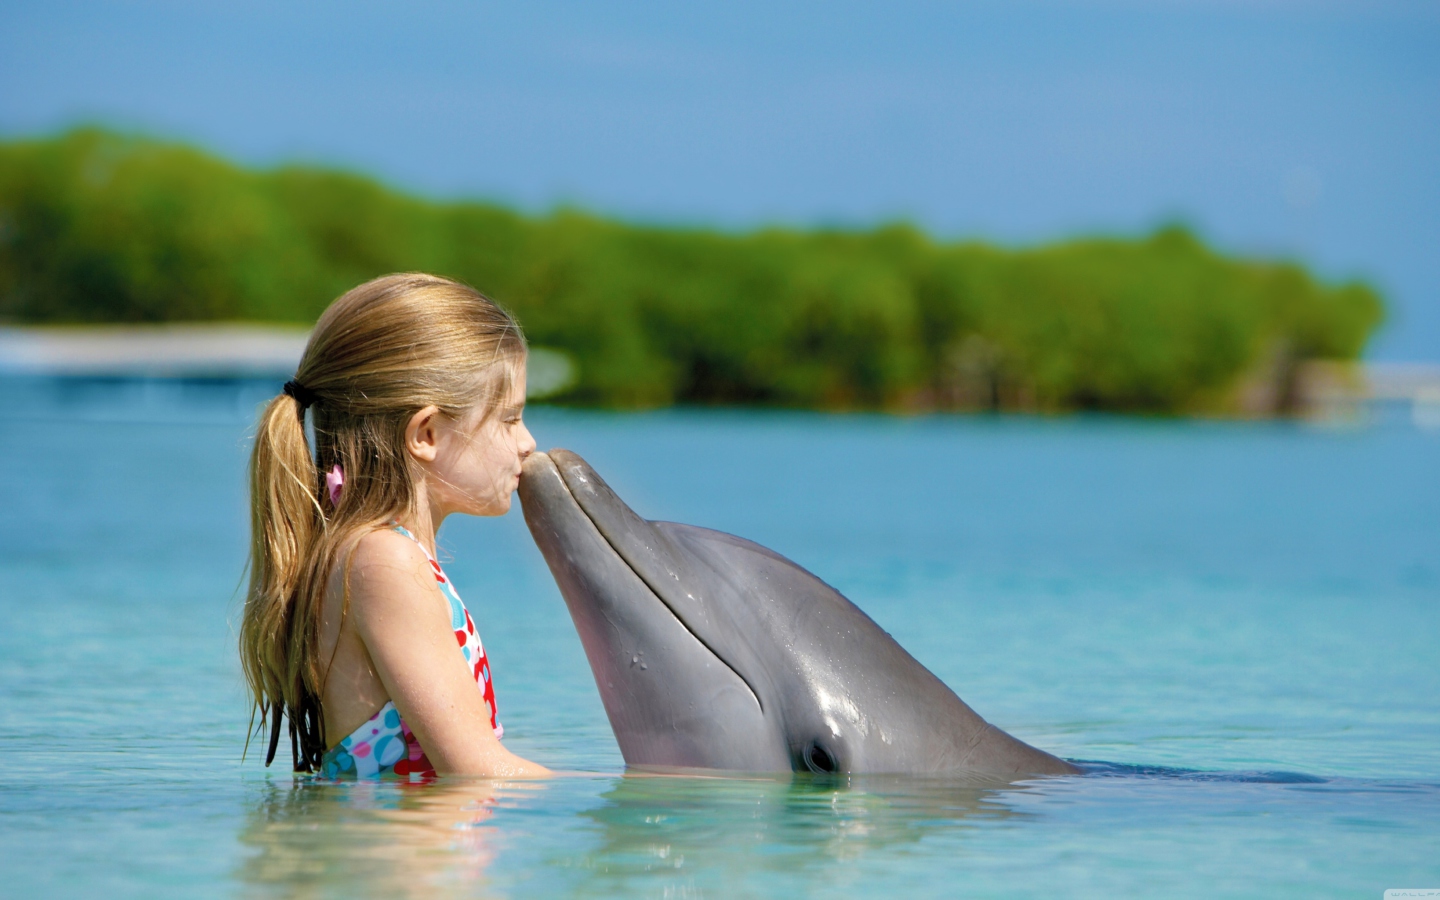 Friendship Between Girl And Dolphin wallpaper 1440x900